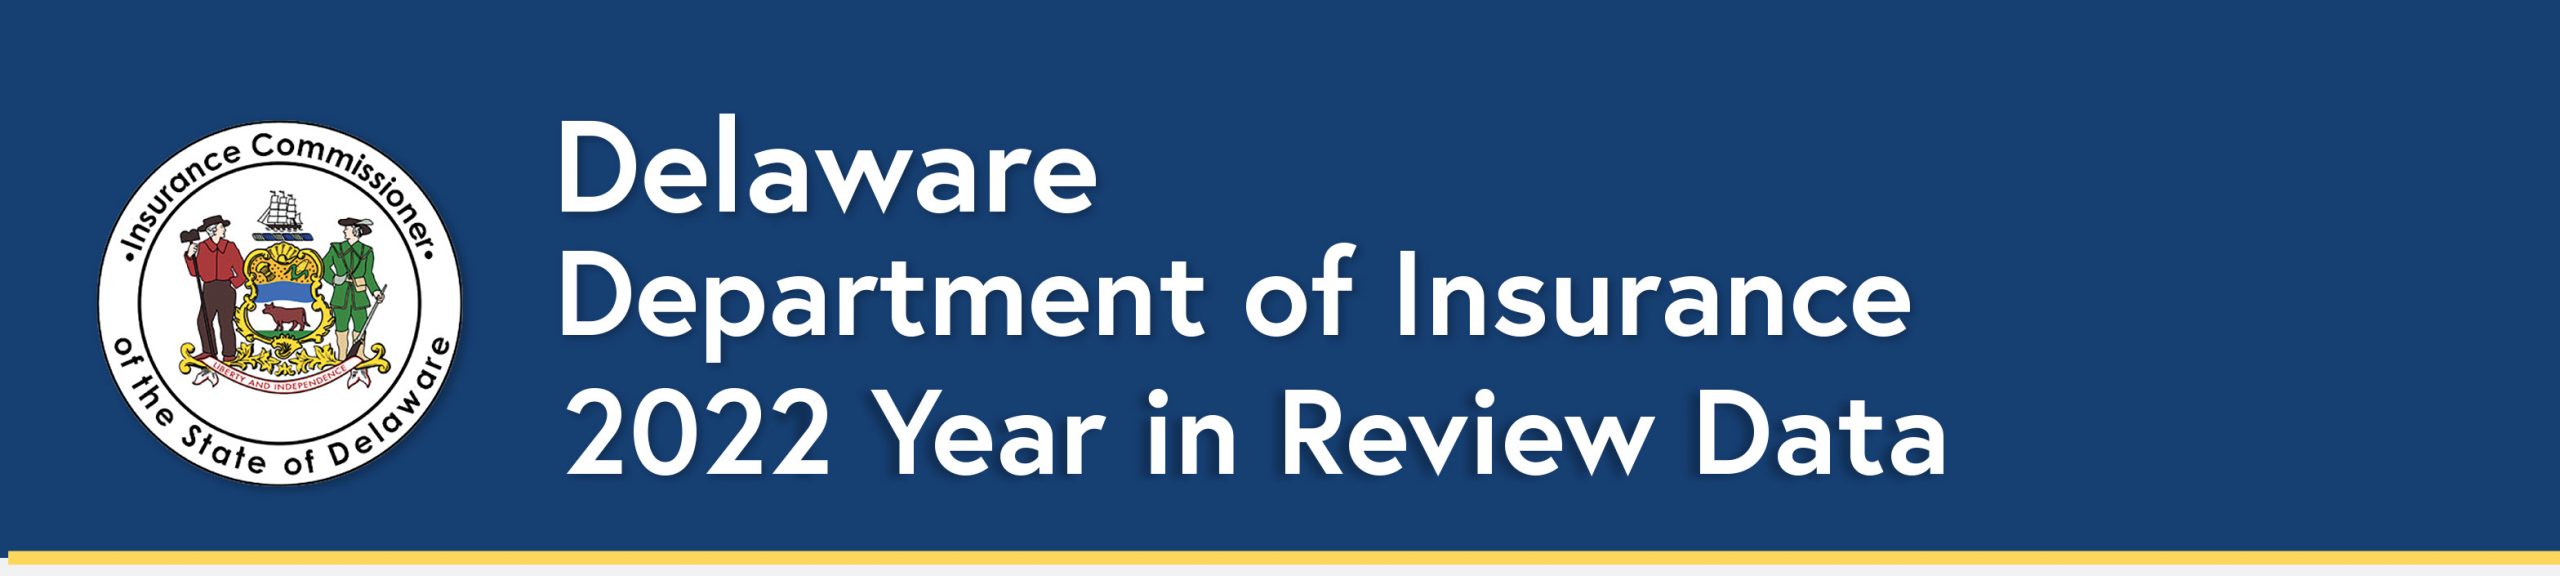 Delaware Department of Insurance Year in Review Banner